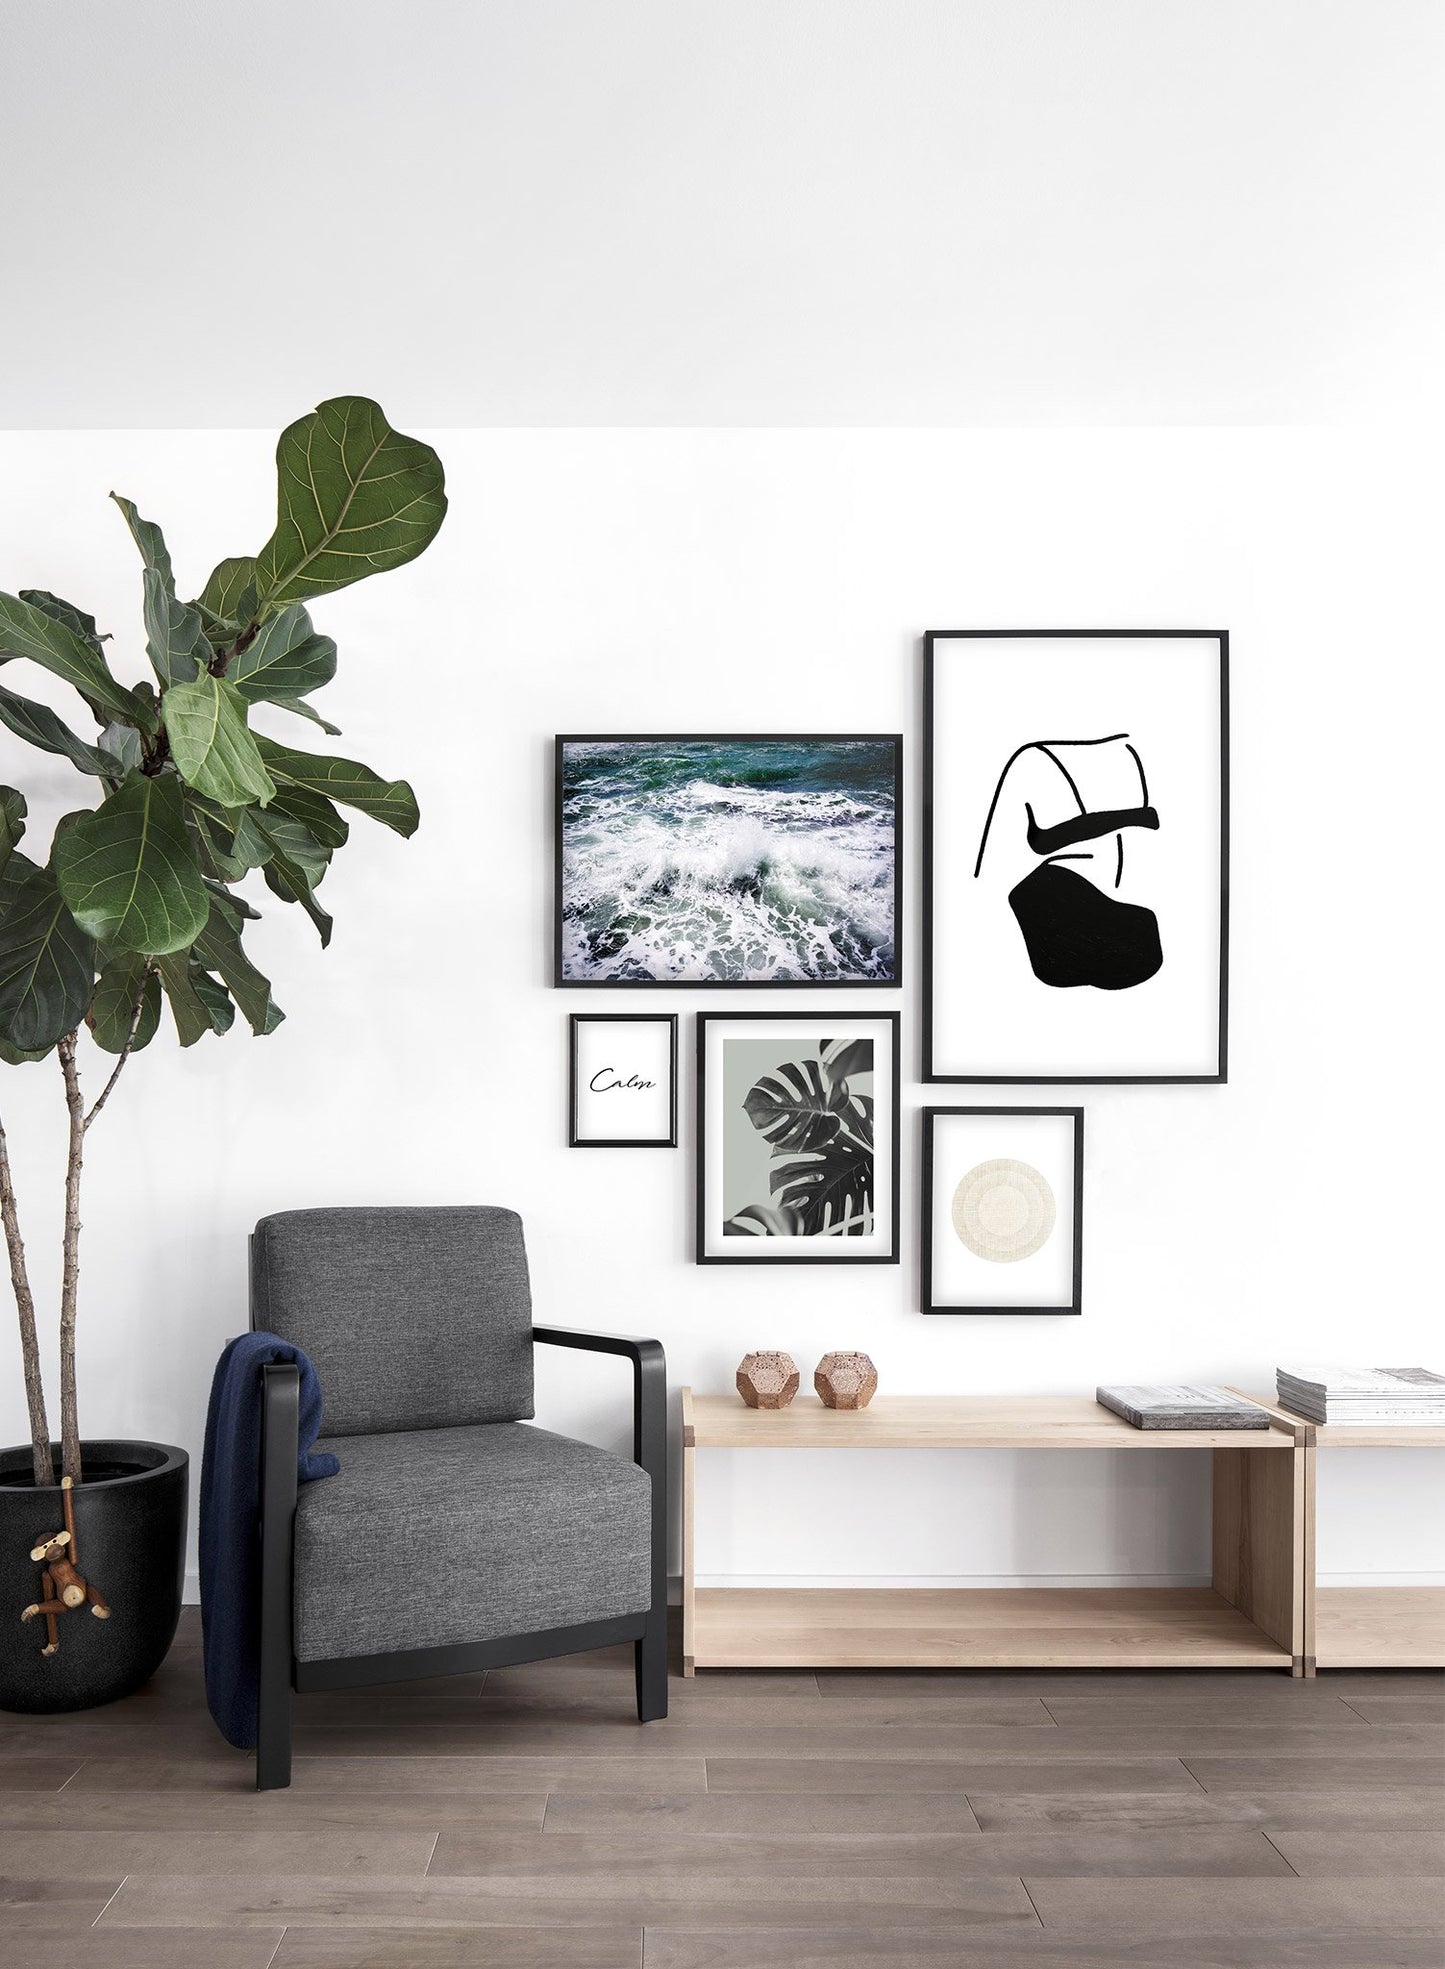 Modern photography poster by Opposite Wall with crashing ocean waves - Lifestyle Gallery - Living Room